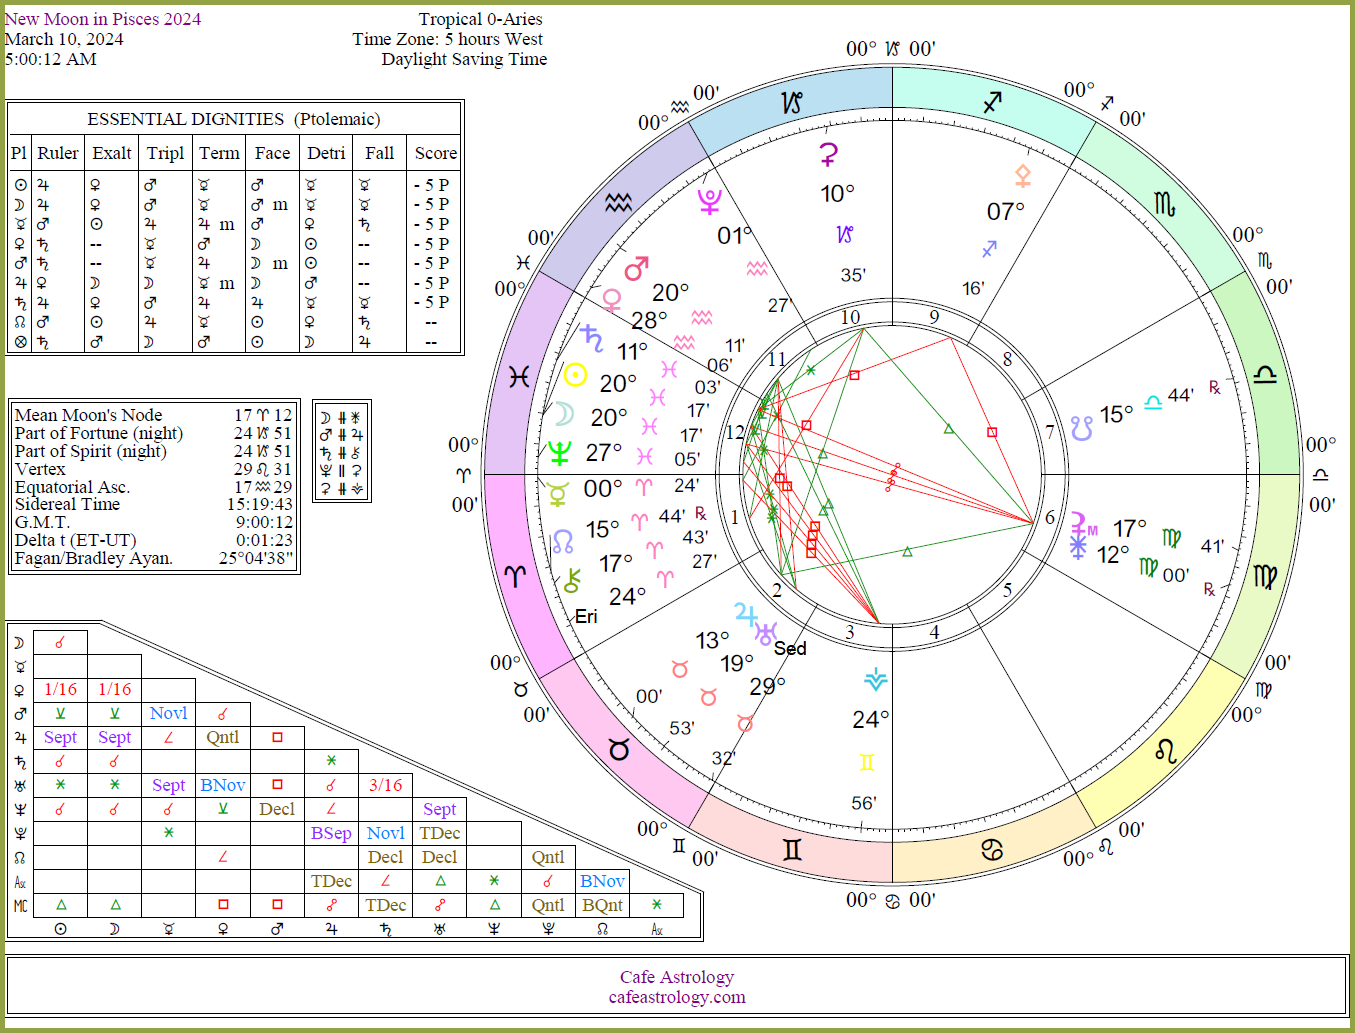 The chart wheel shows the Sun next to the Moon, both at 20 degrees Pisces